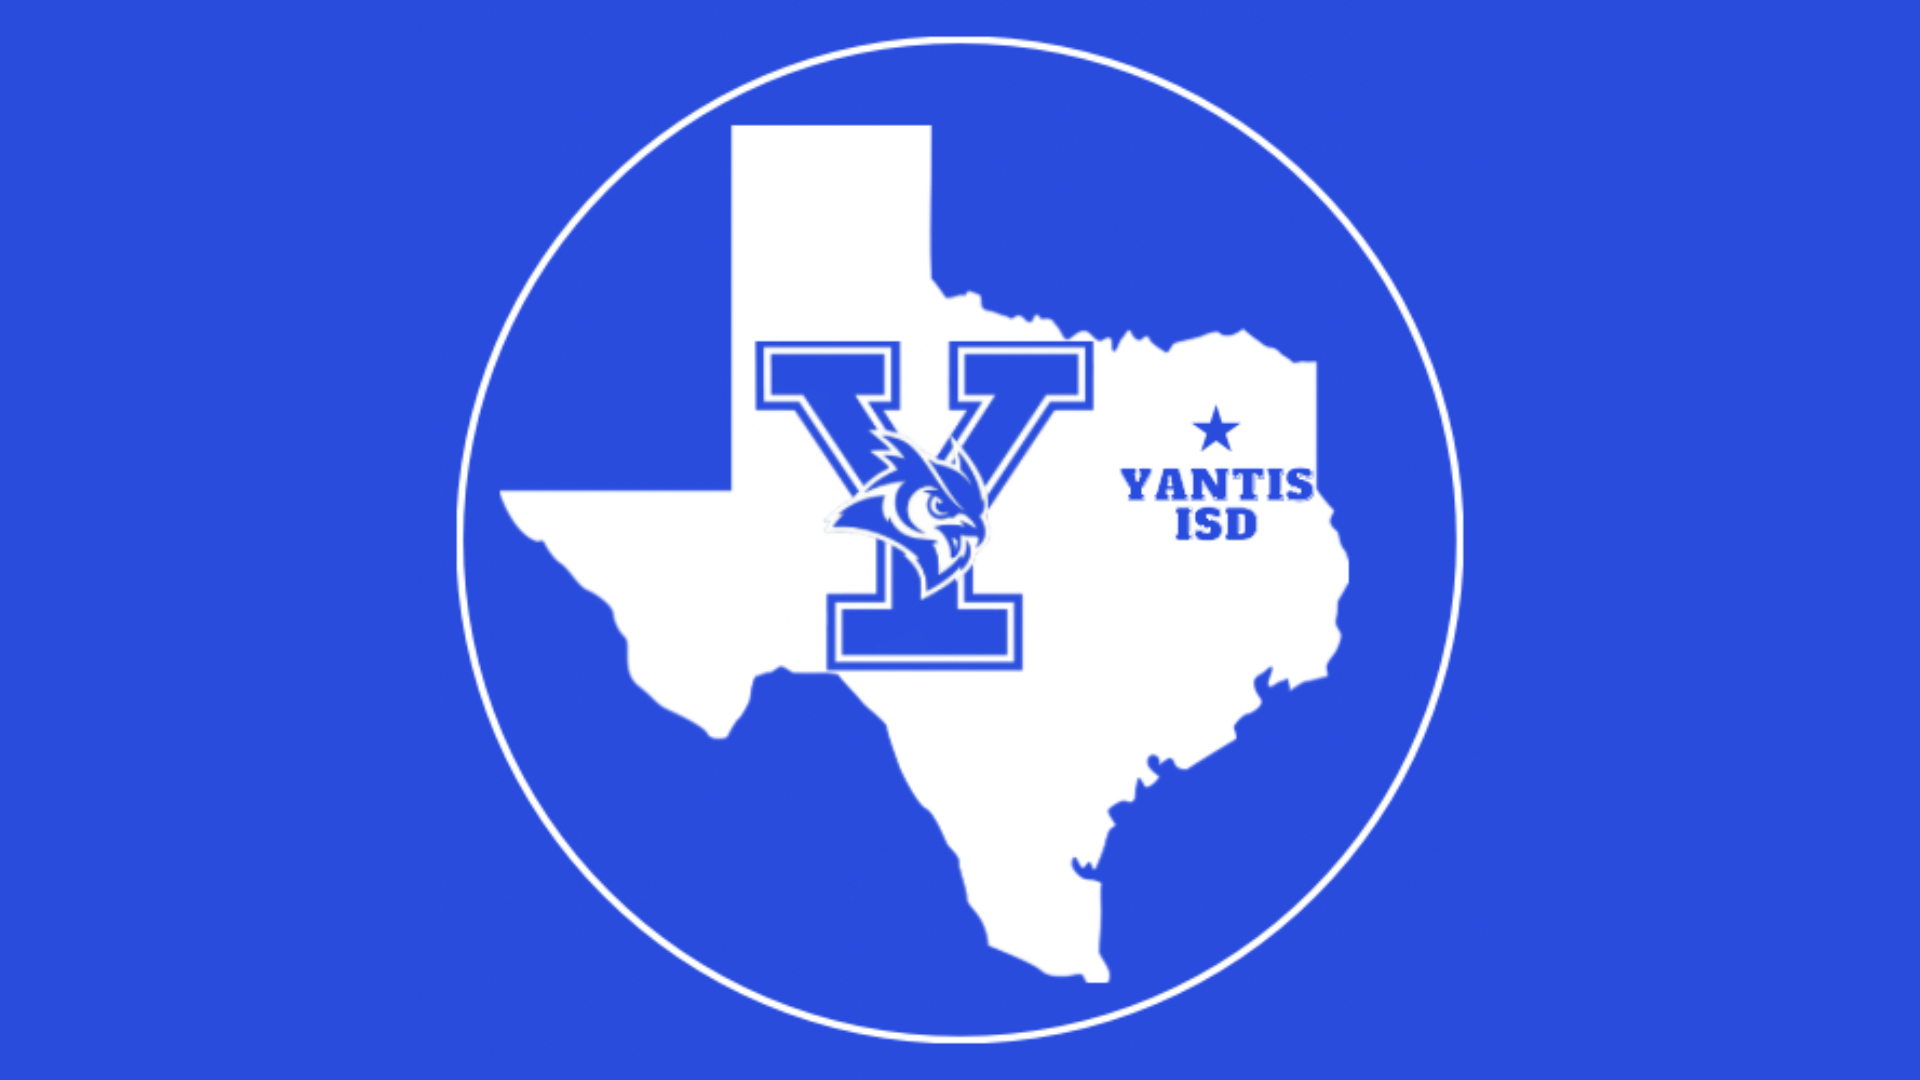 Texas with circle Y for Yantis ISD